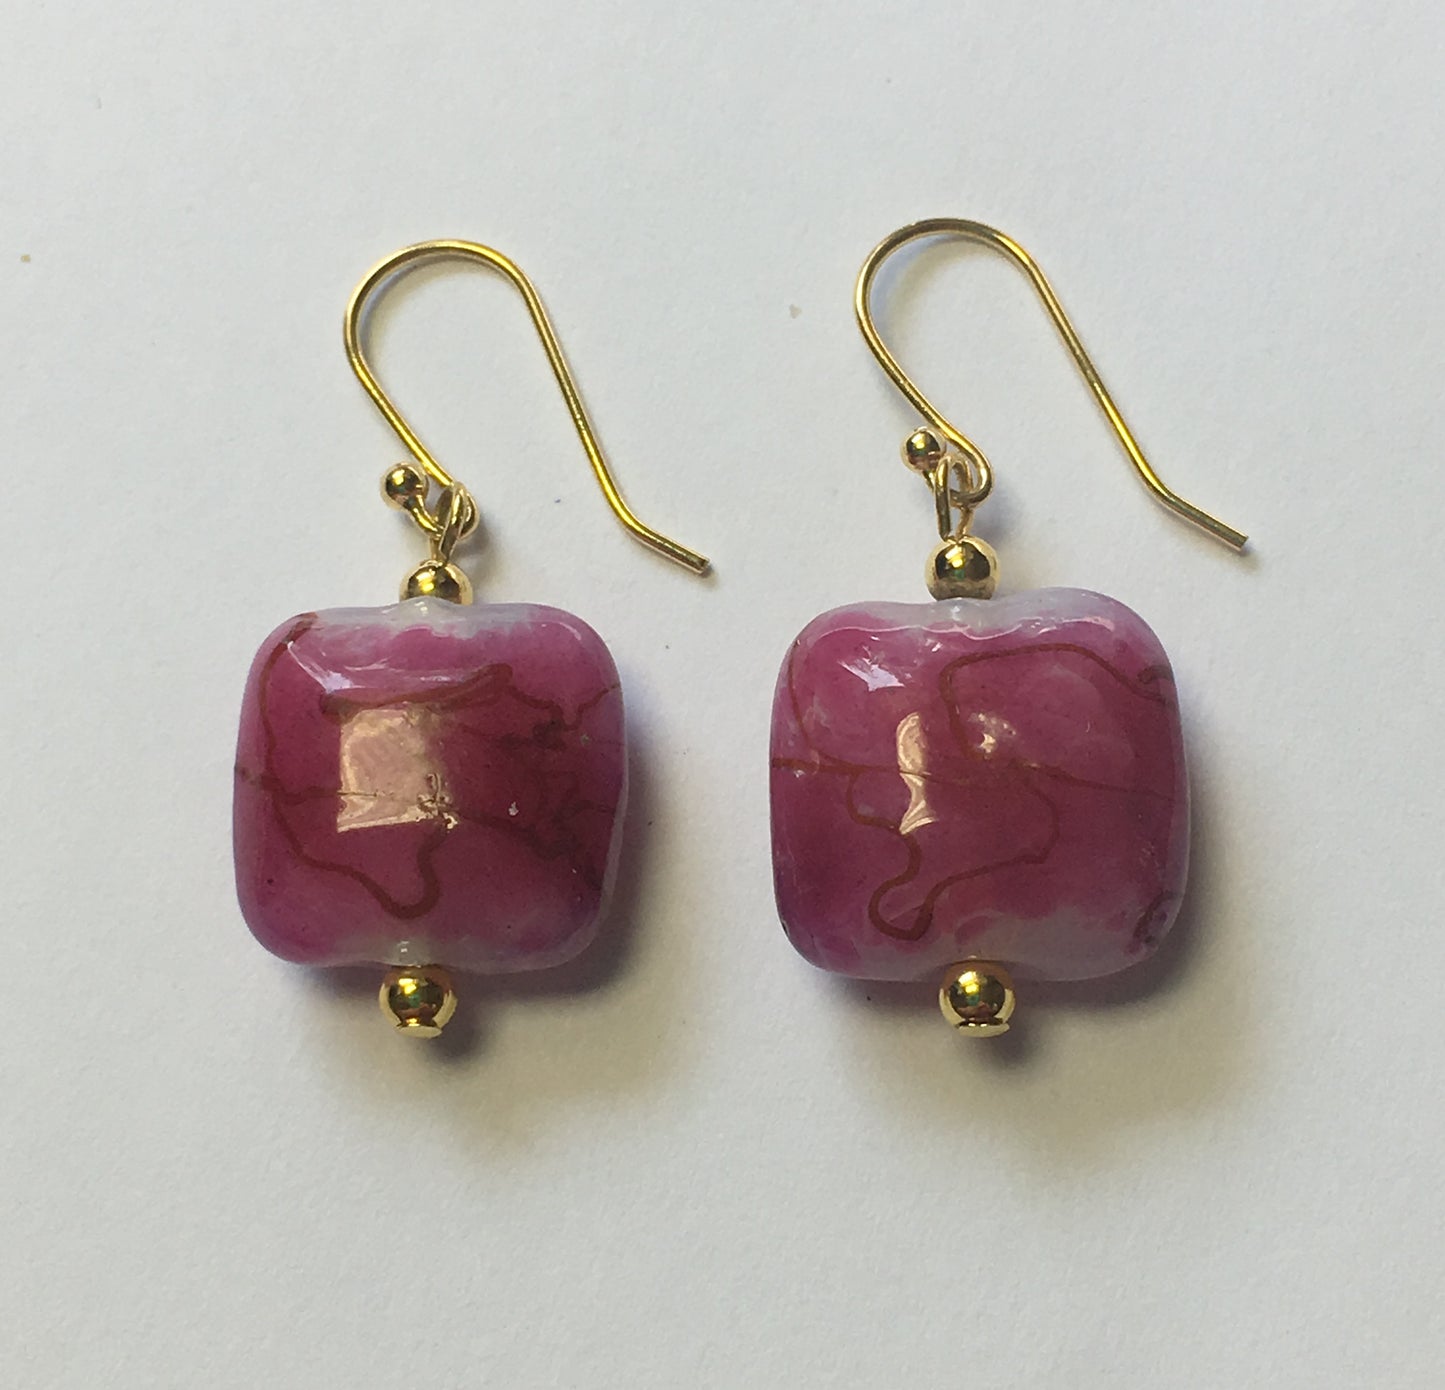 Neon Pink Drizzle Rounded Square Glass Bead Earrings With 14K Gold-Plated Beads and Ear Wires